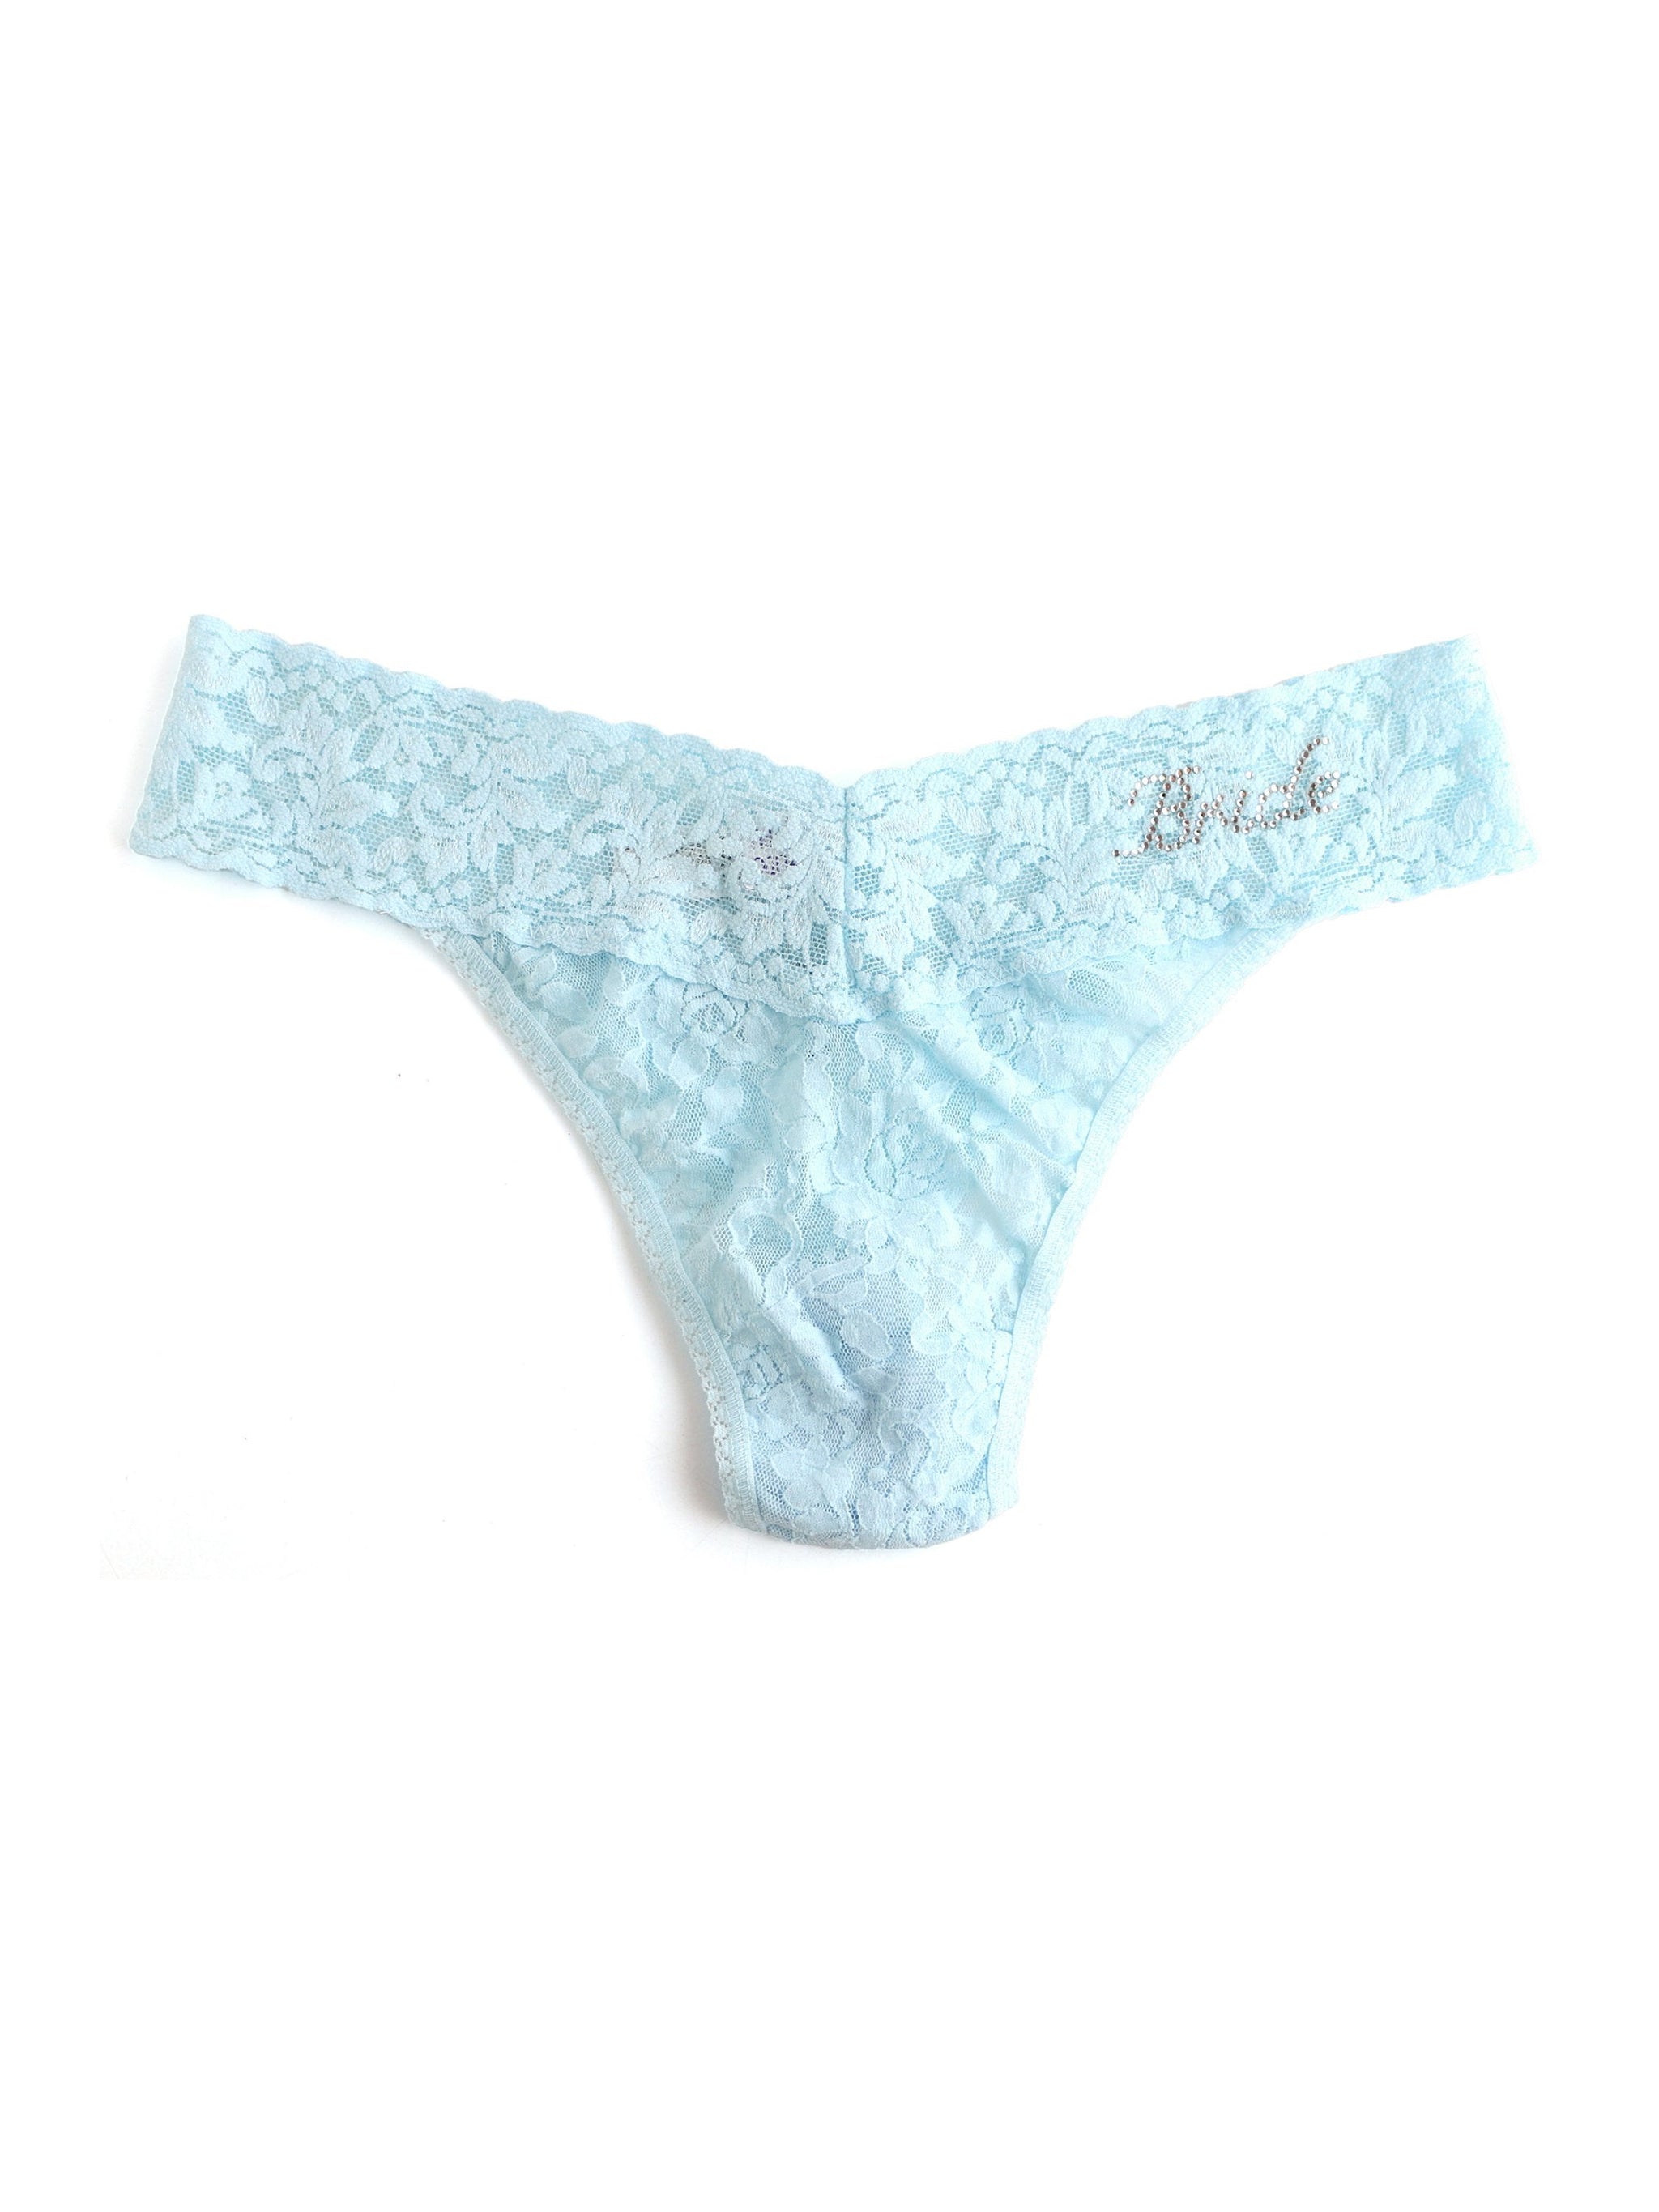 Bride Crystal Signature Lace Original Rise Thong-CELESTE-CLEAR CRYSTALS-Hanky Panky